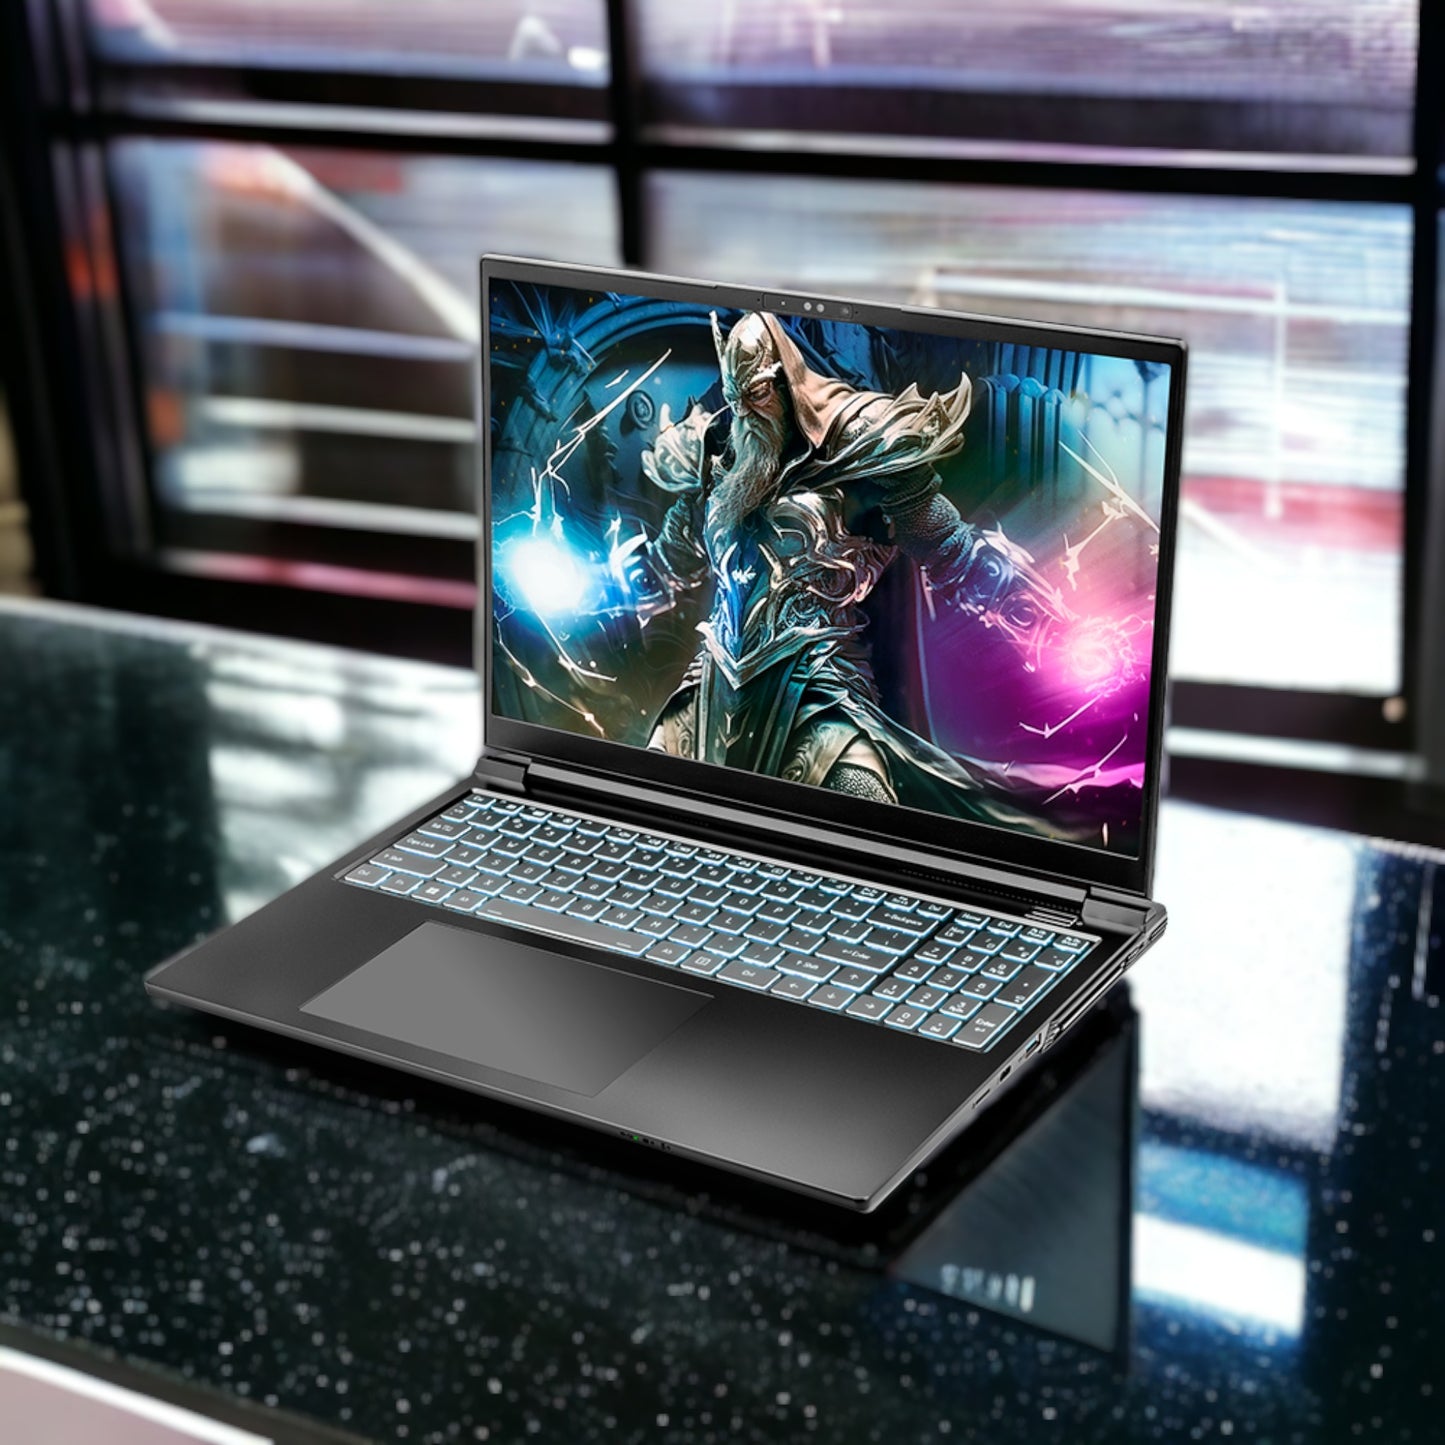 SAGER NP8866E (Clevo PE60SNE-G) Gaming Laptop